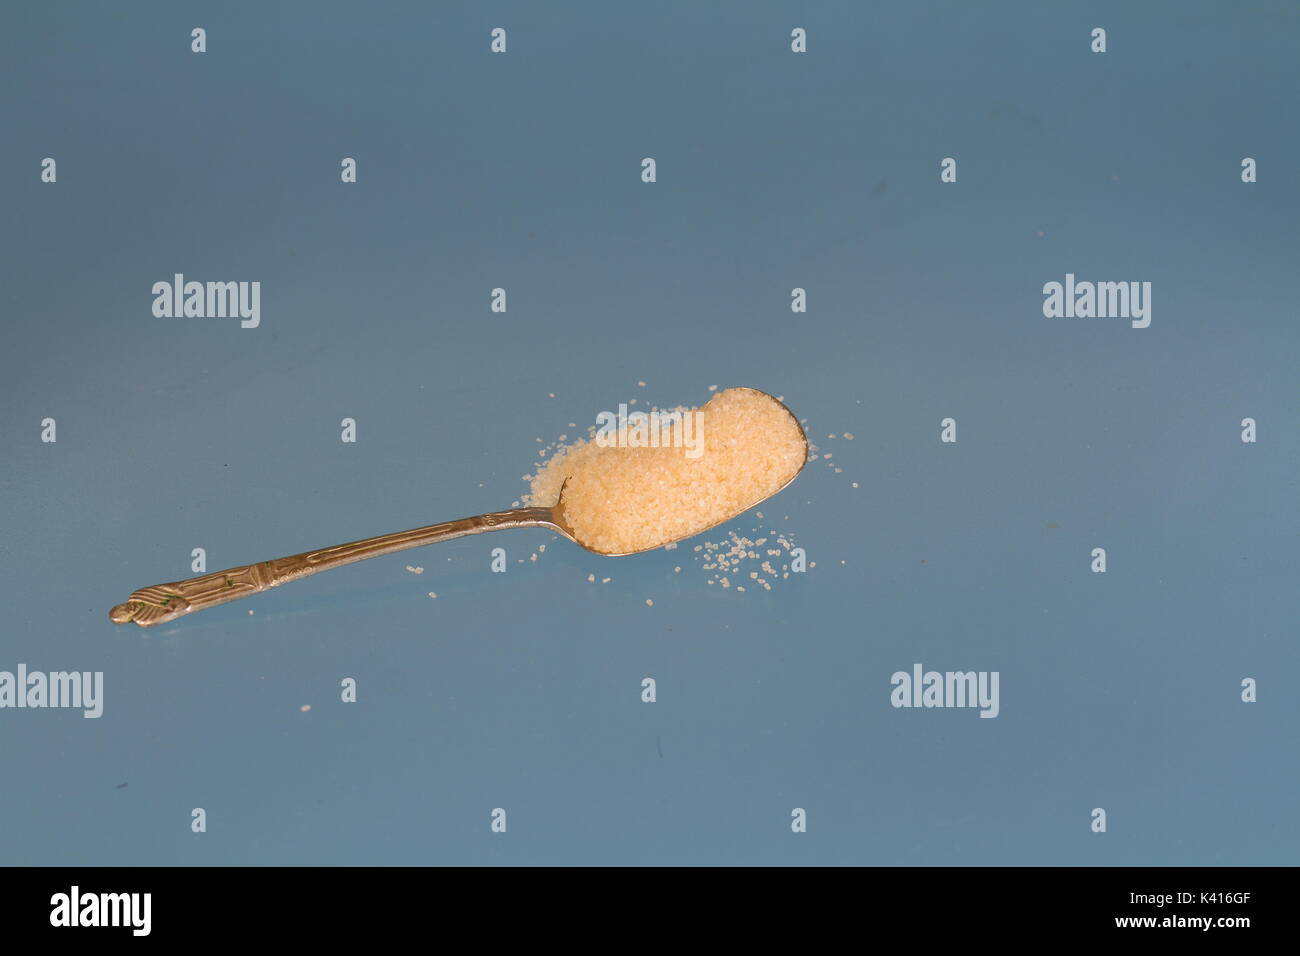 A teaspoon heaped with golden sugar against a clear background in landscape format with copy space Stock Photo